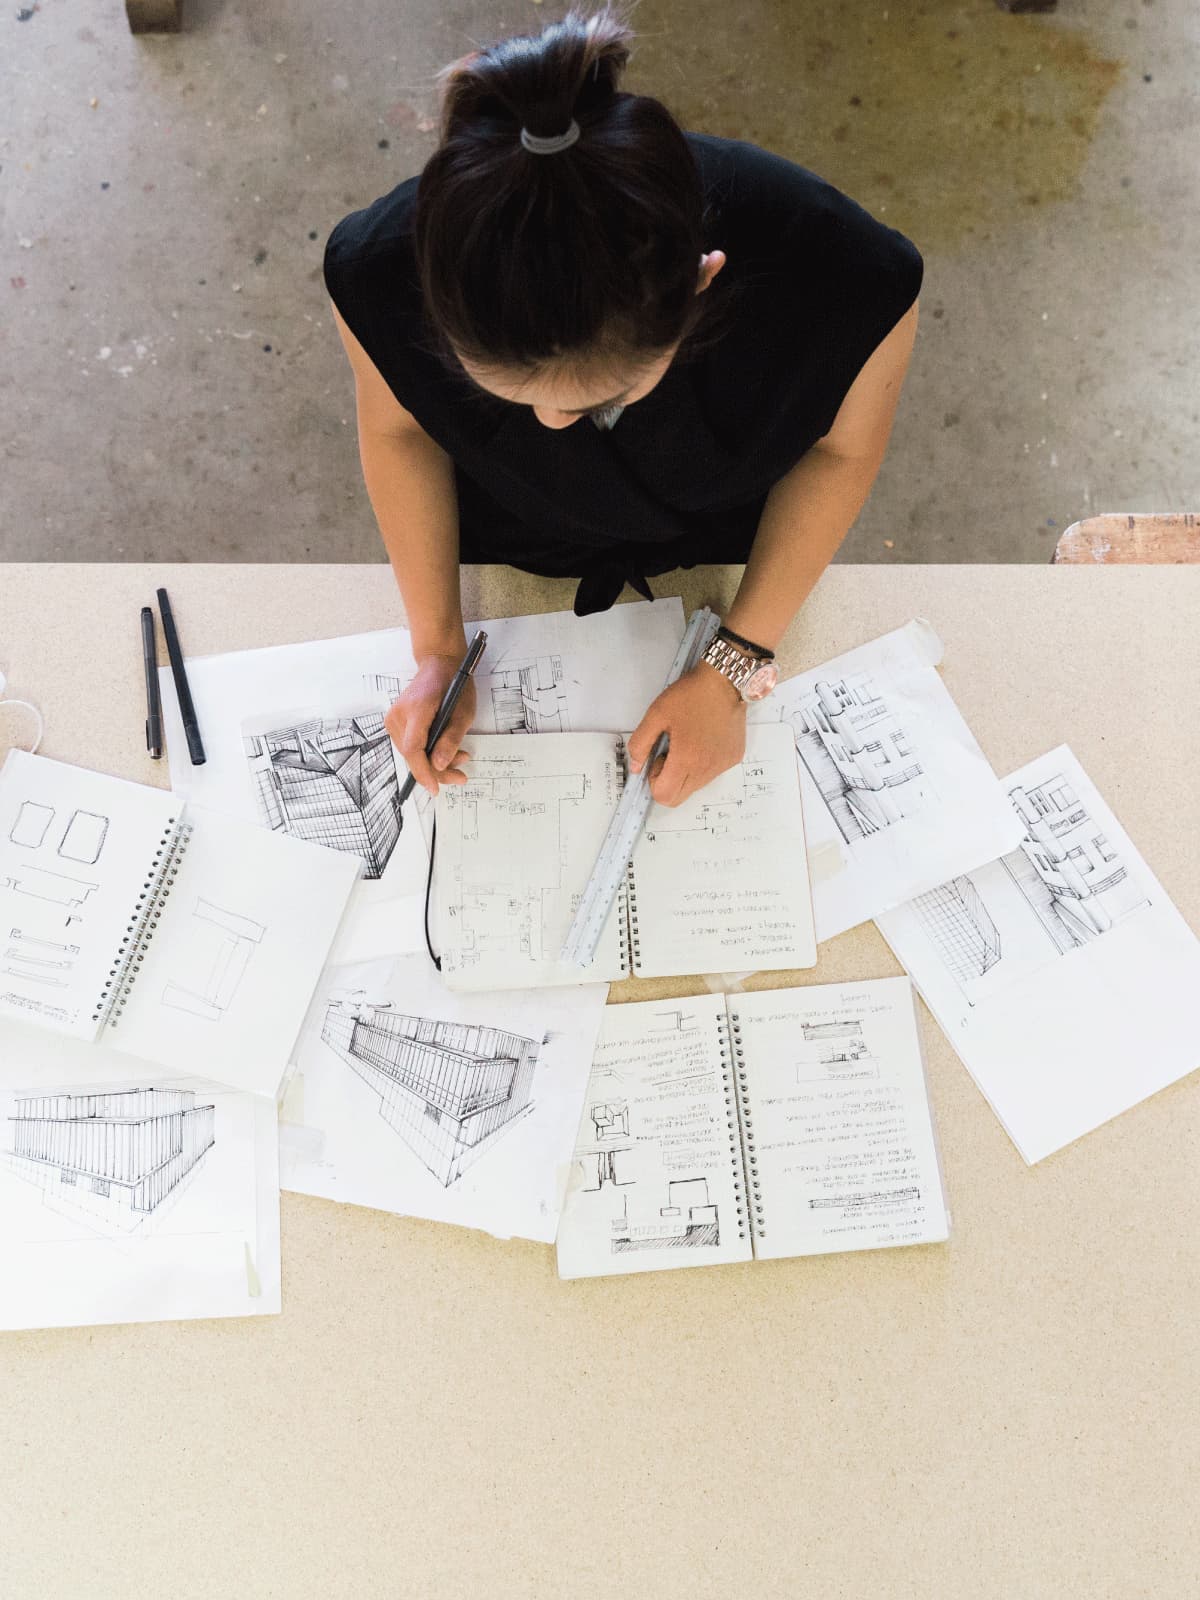 Student reviewing interior design sketches